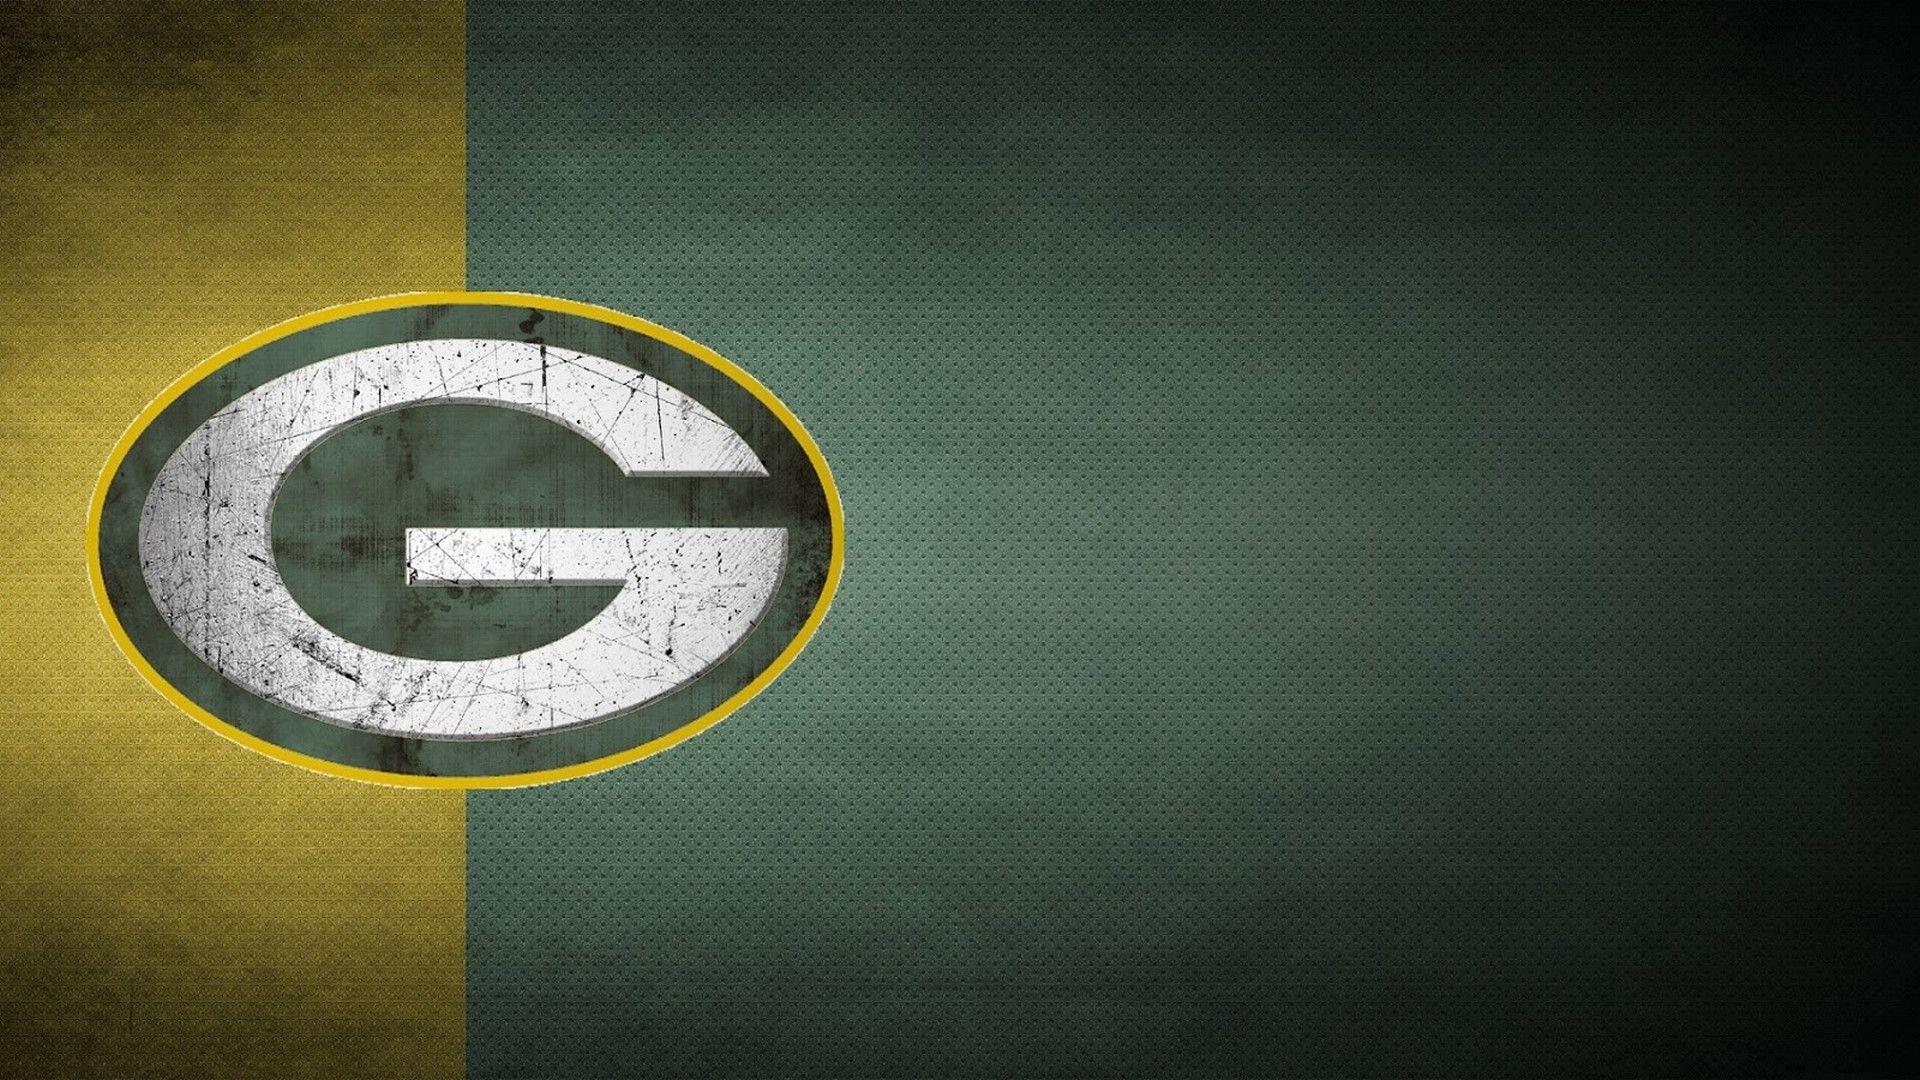 Green Bay Packers Wallpapers  Top Free Green Bay Packers Backgrounds   WallpaperAccess